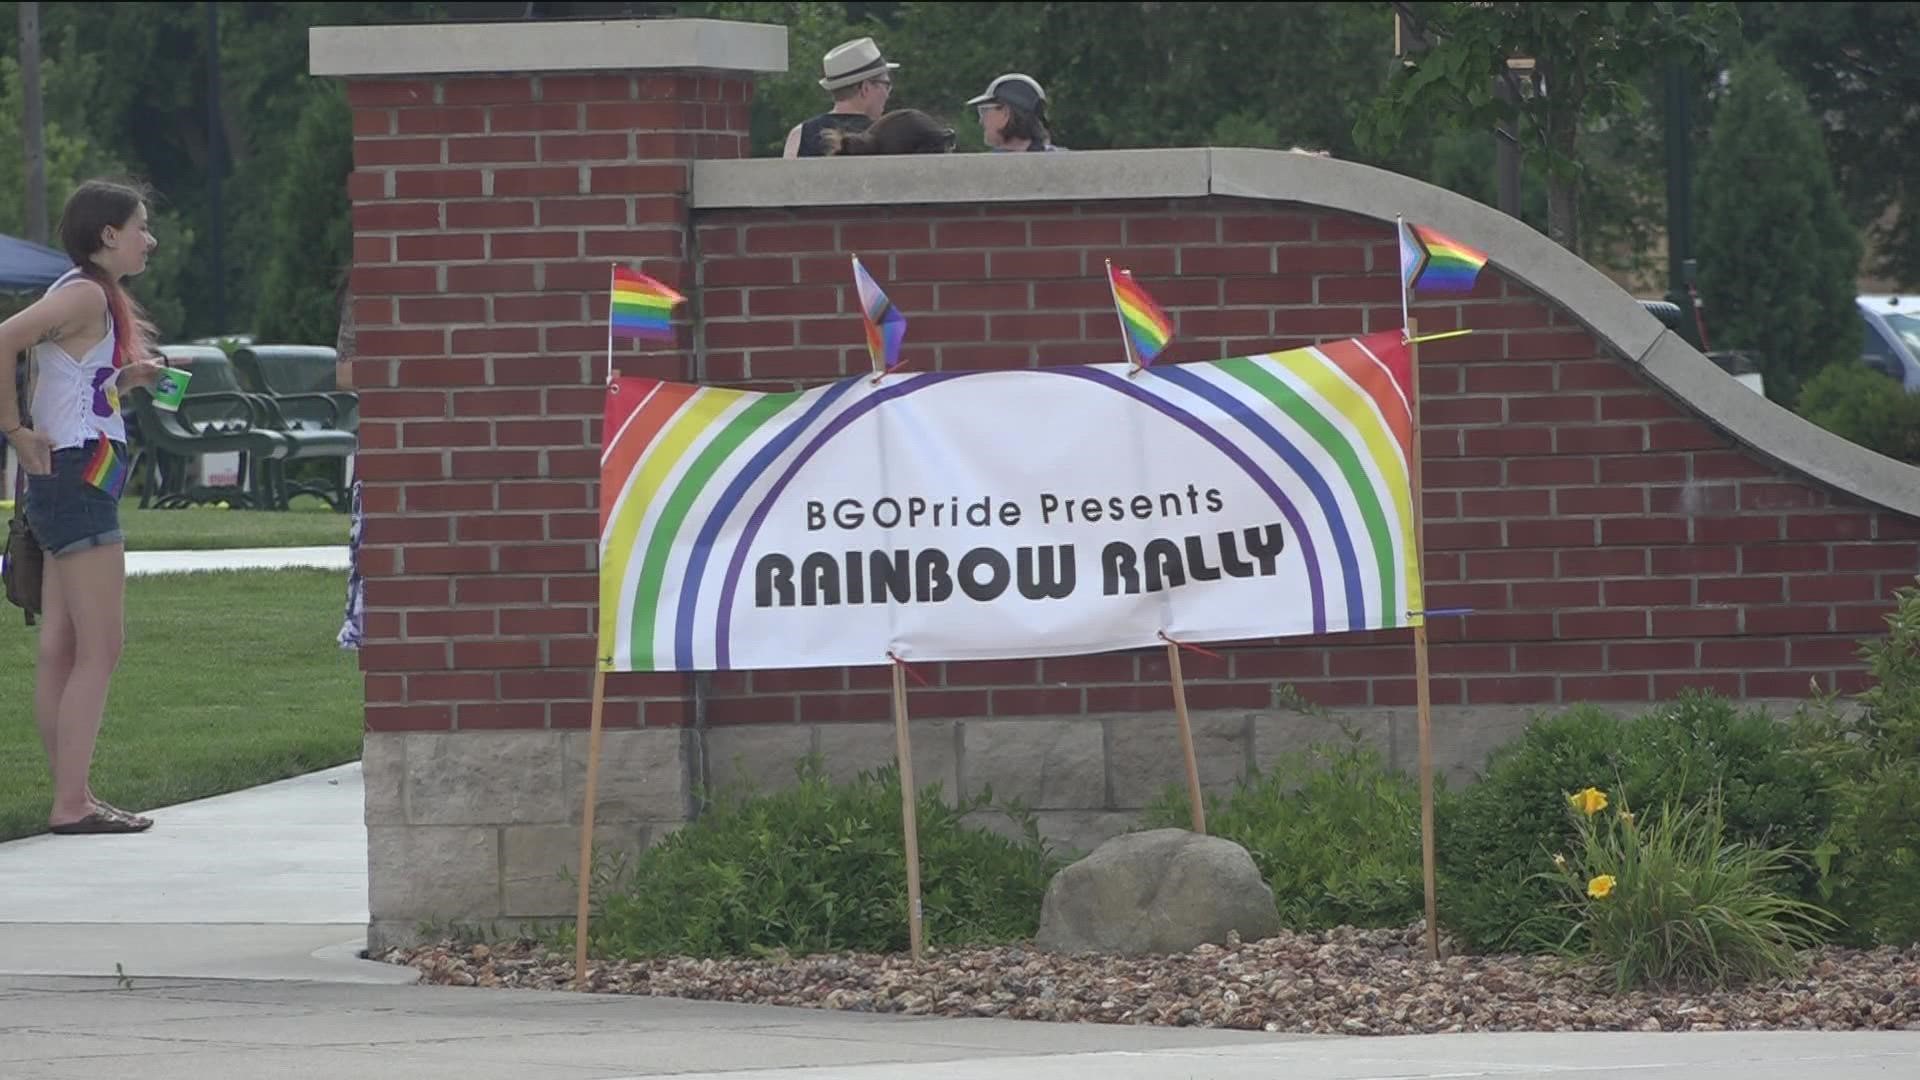 The BGO Pride Association held its inaugural Rainbow Rally at the Wooster Green Park on Saturday where special guest Jim Obergefell spoke.